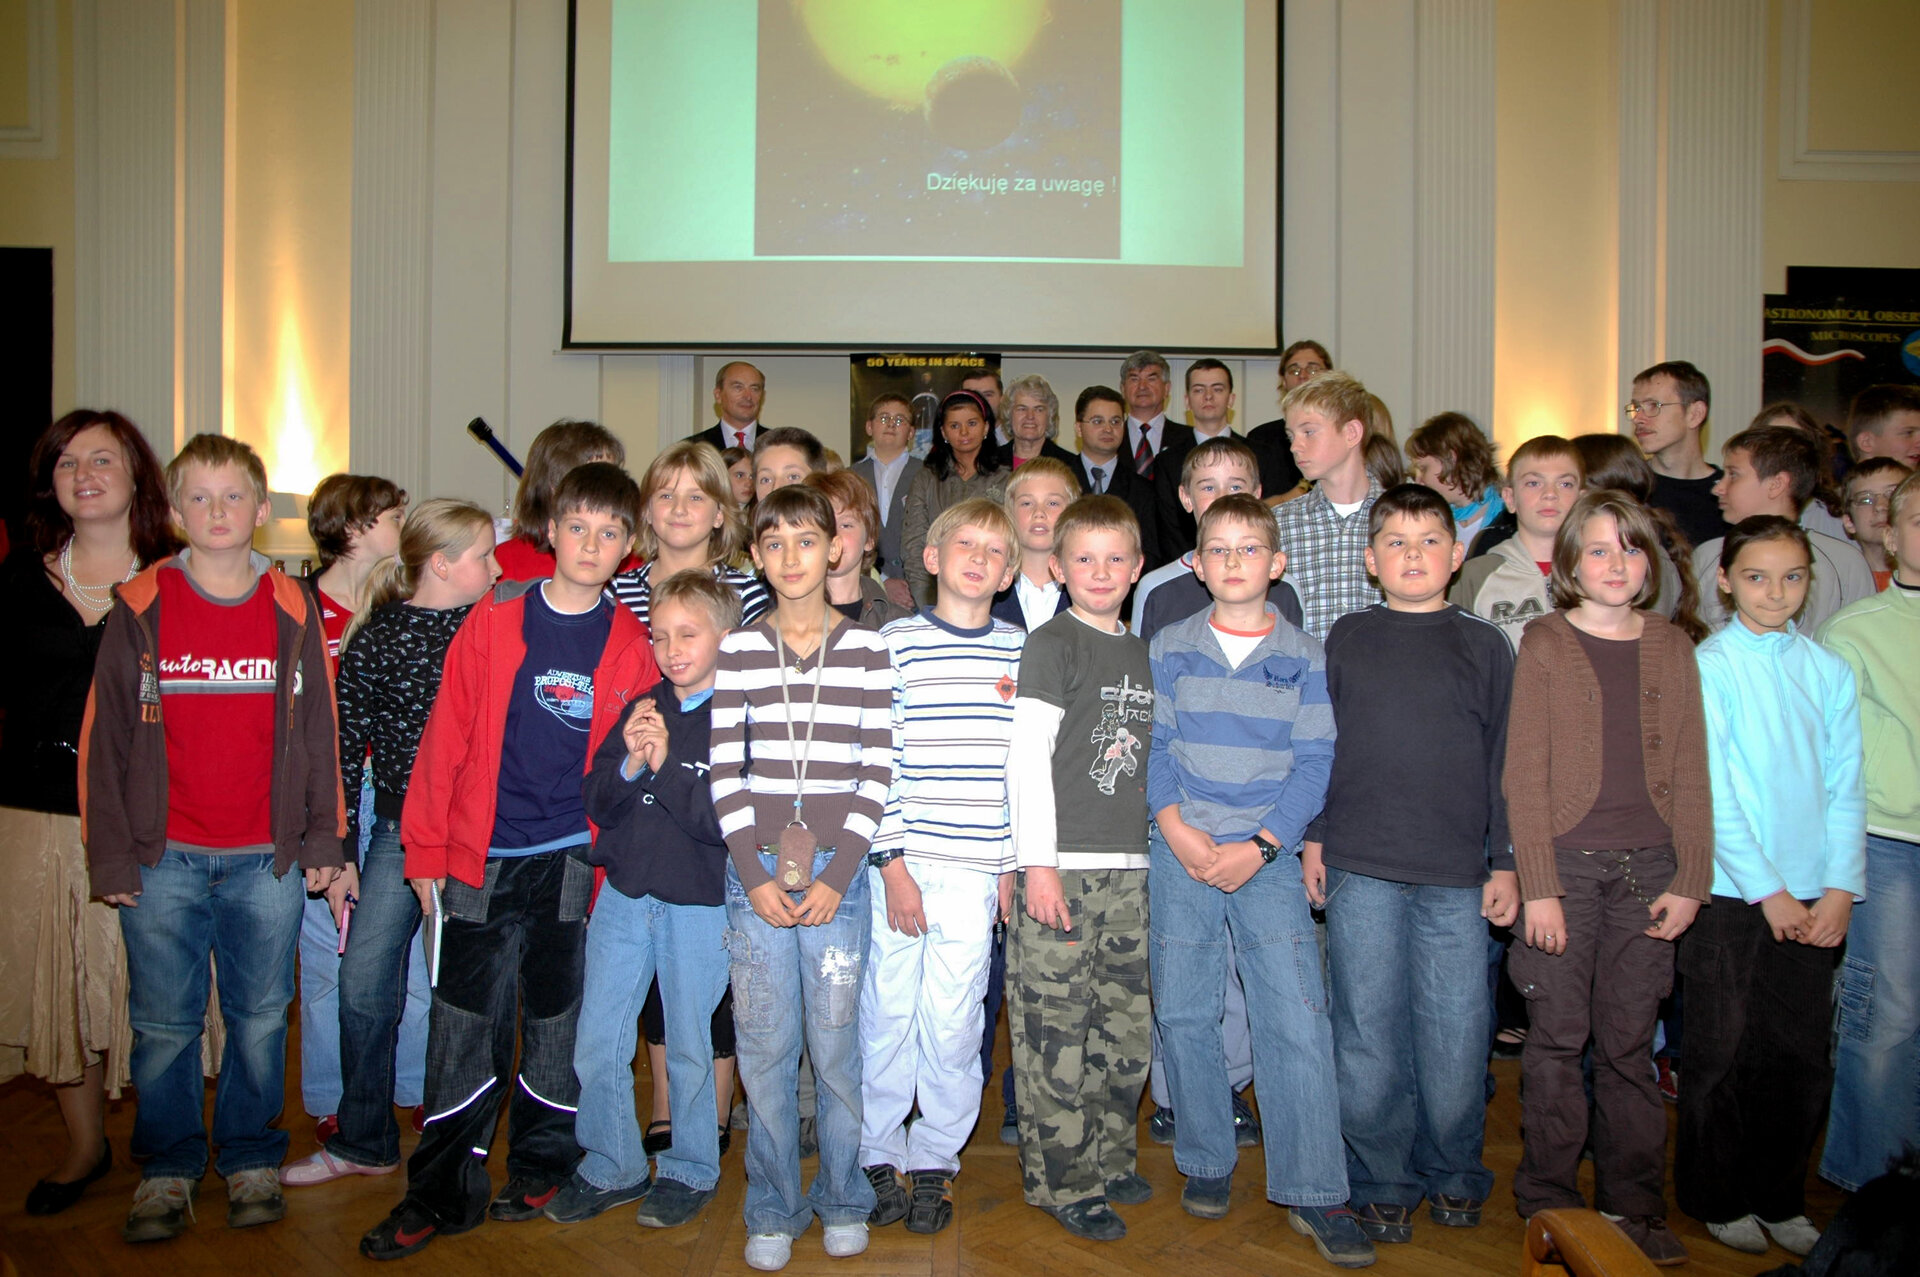 The next 50 years of space - Polish children present their ideas